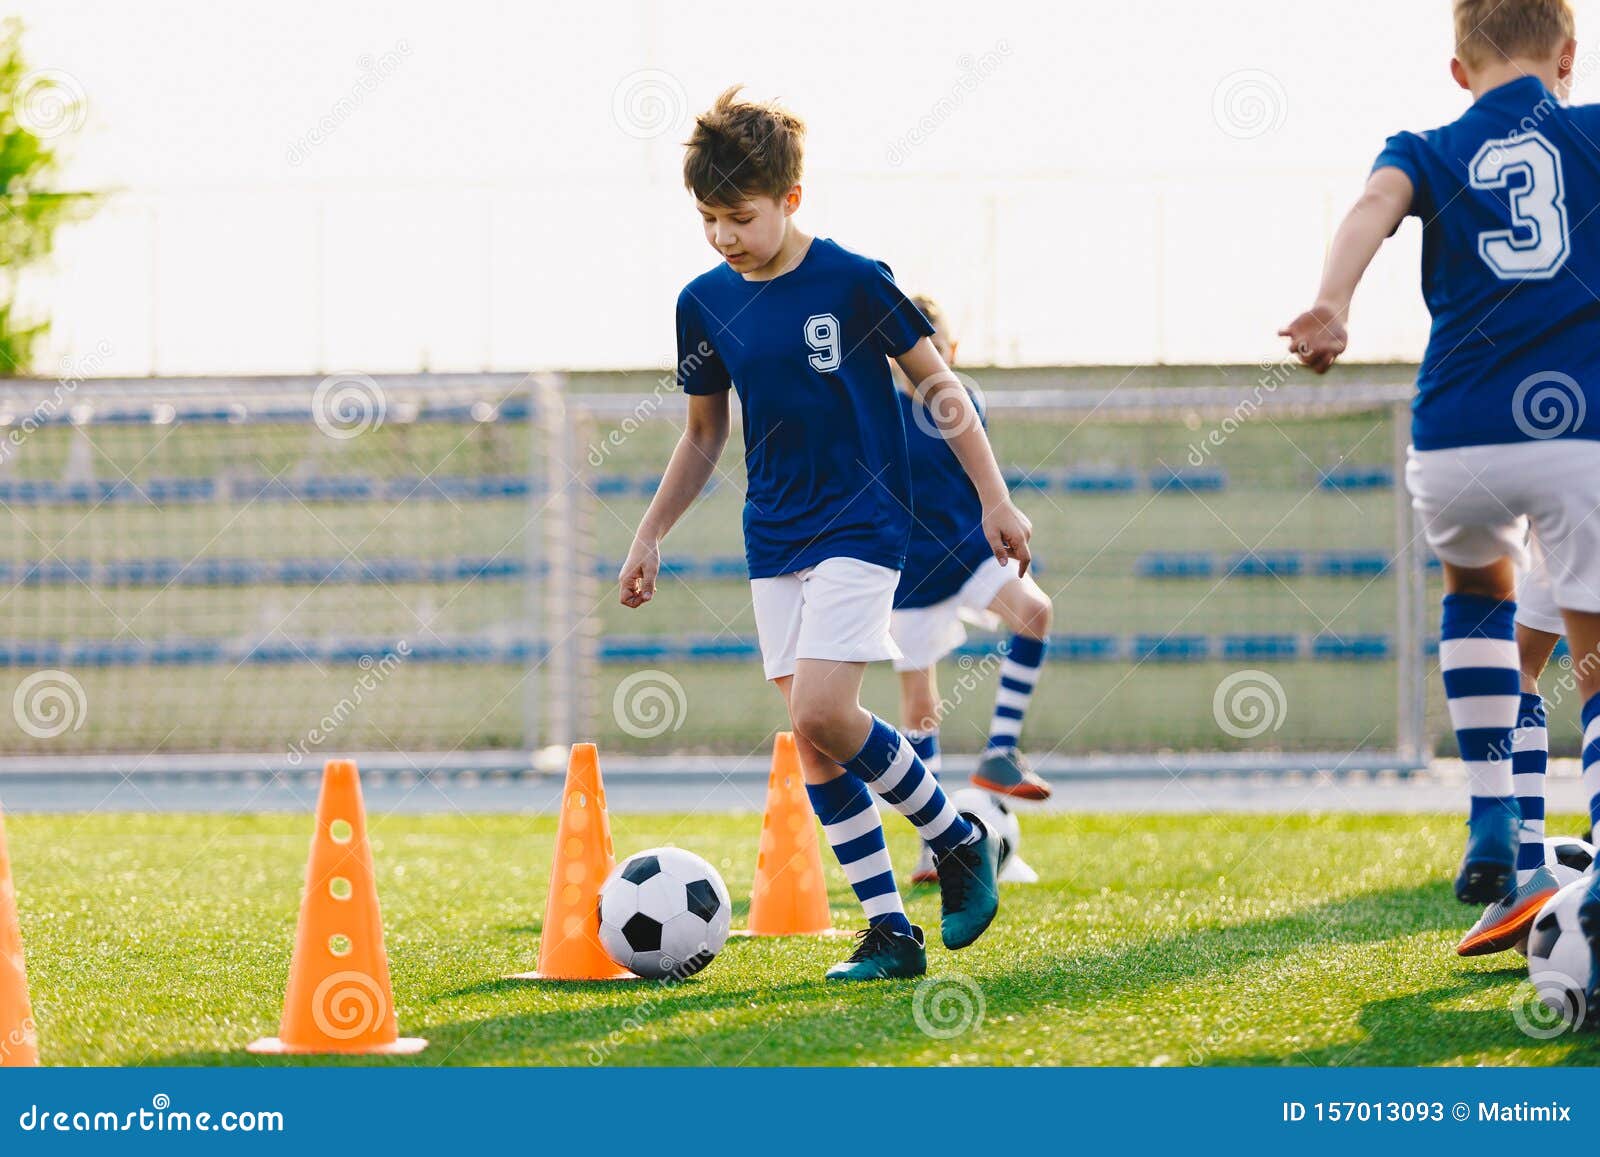 Soccer Drills The Slalom Drill With Ball Soccer Football Training Session Stock Image Image Of Coach Junior